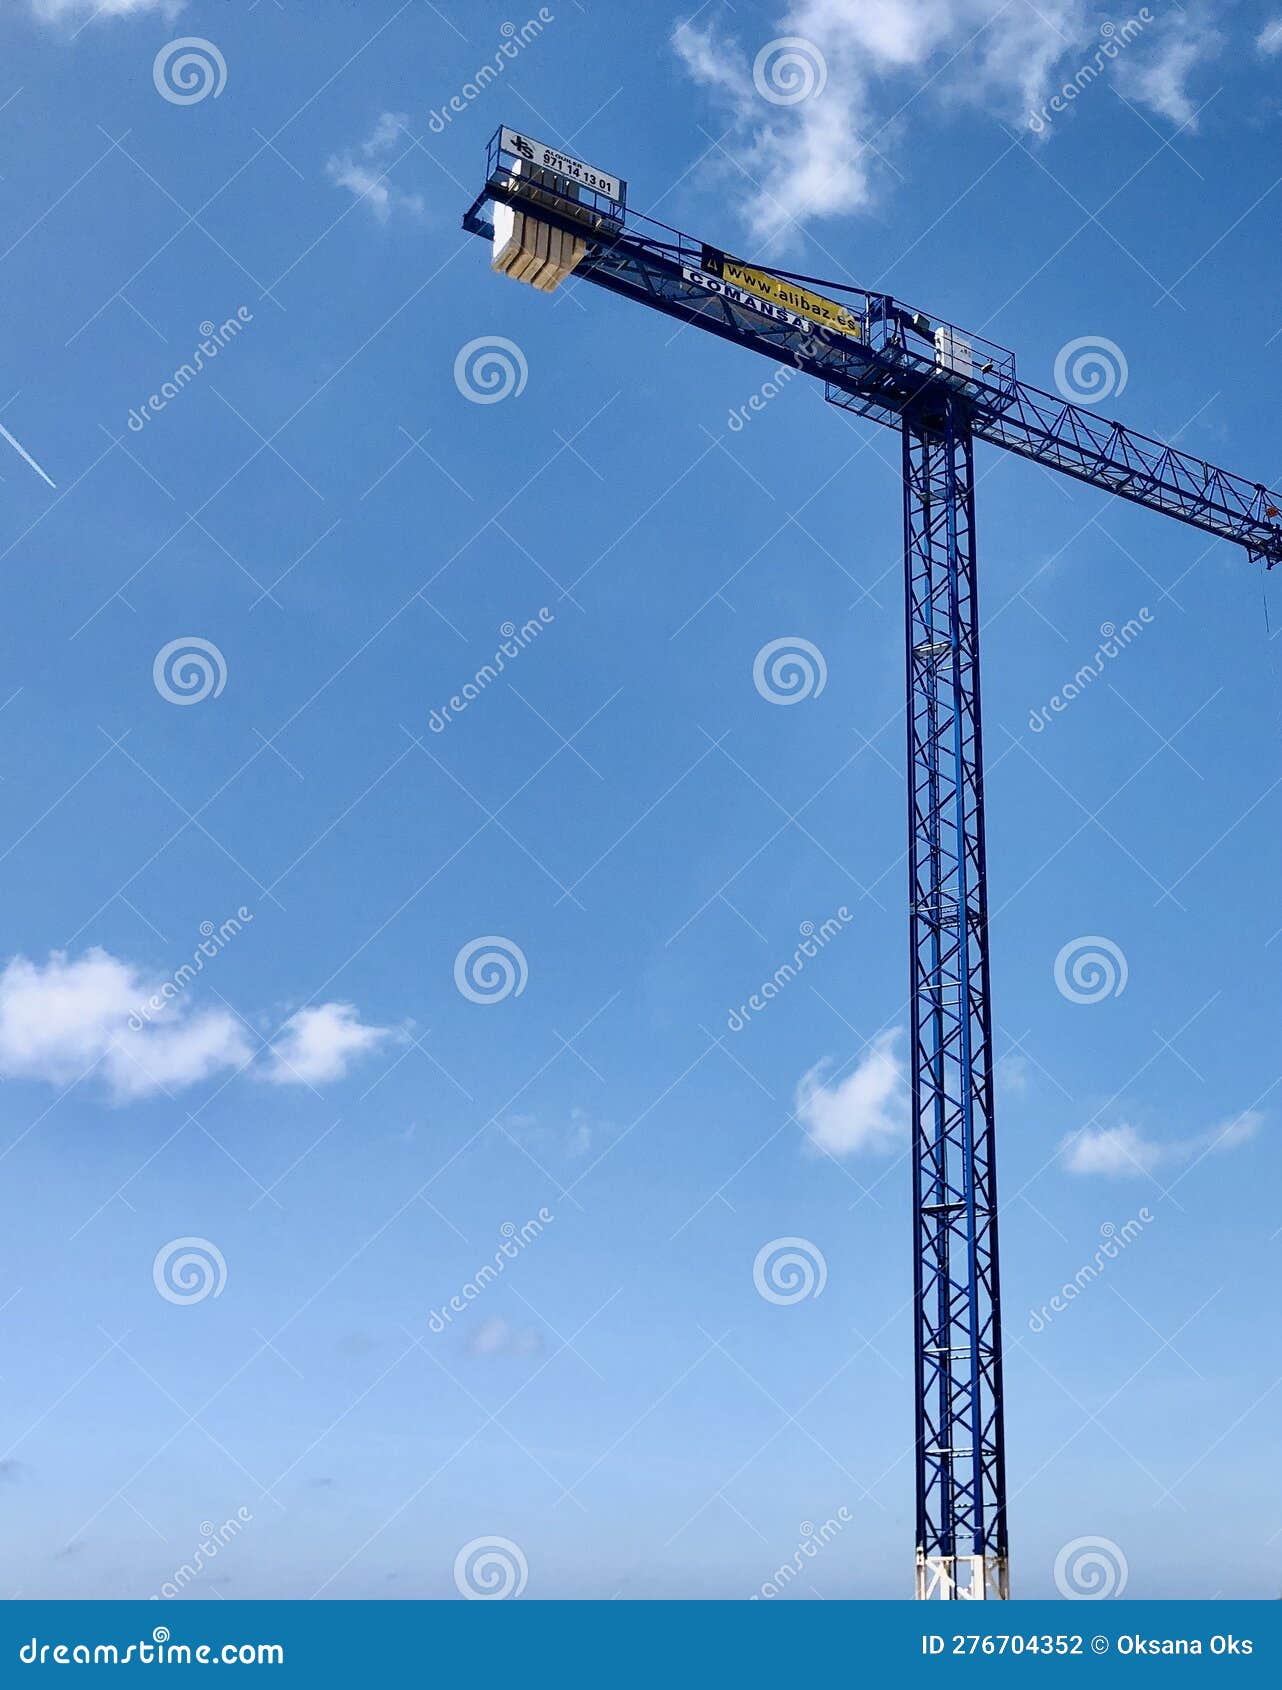 crane  in the blue sky background.